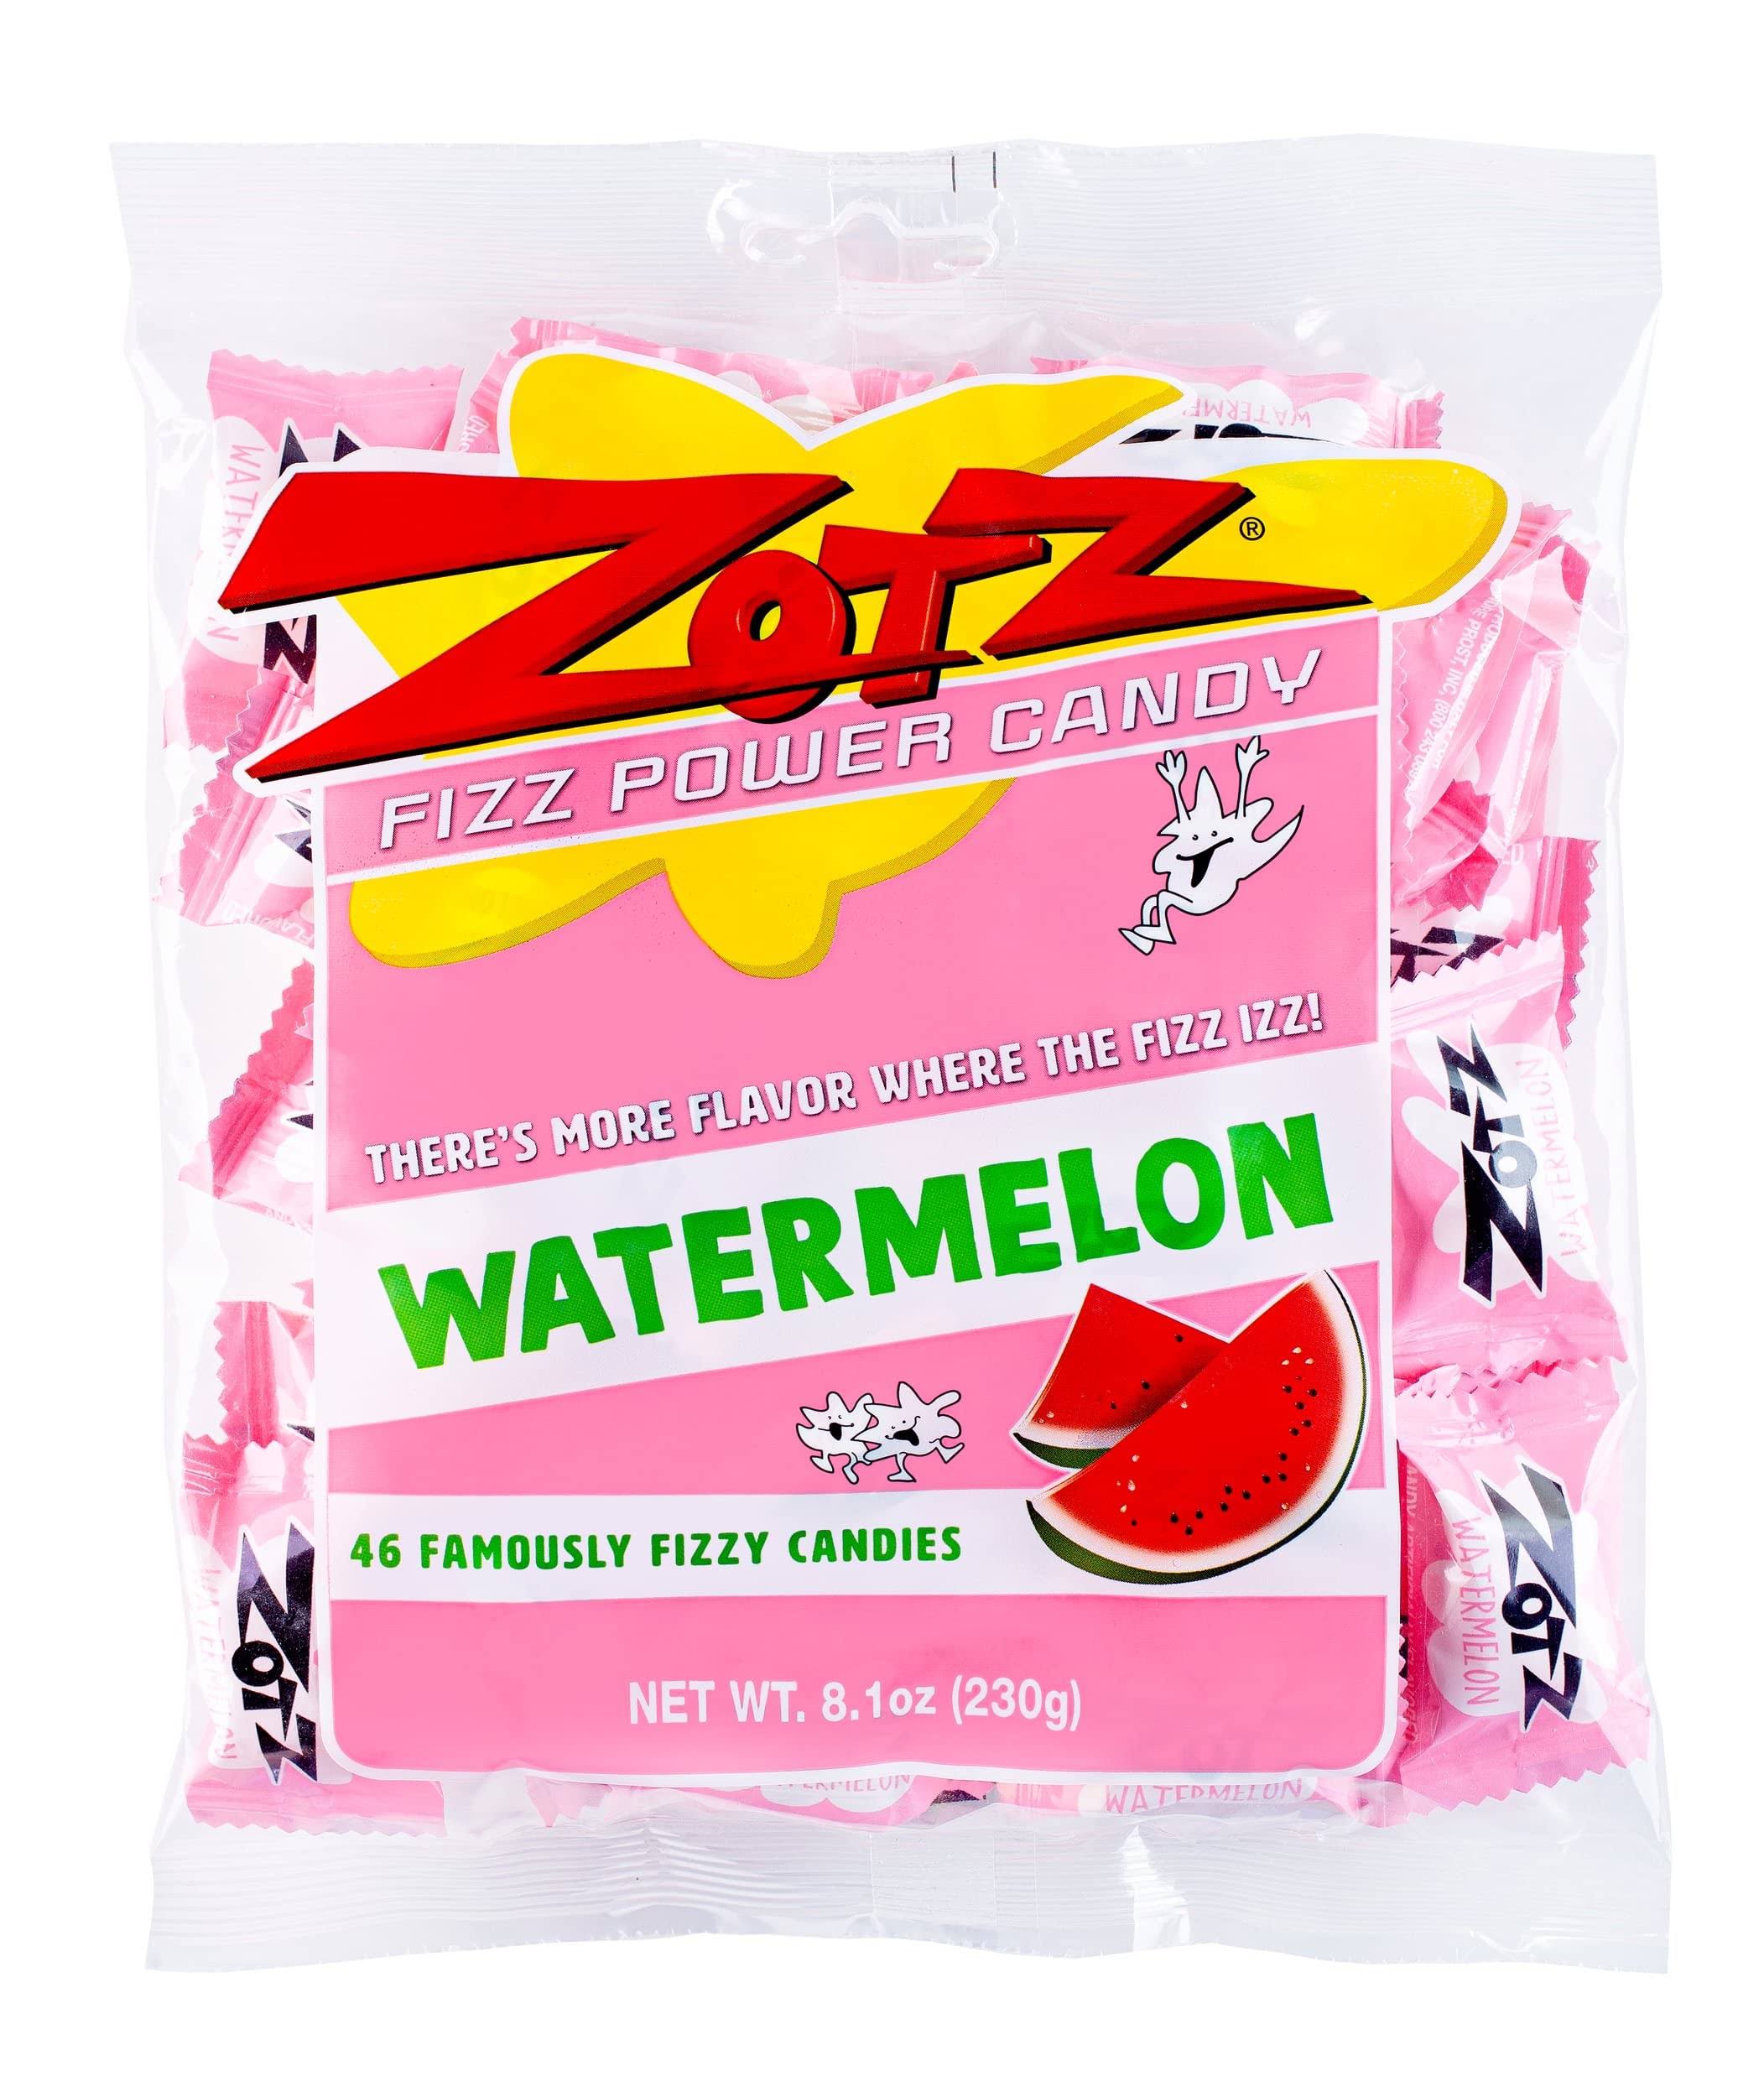 Zotz Fizz Power Candy Watermelon - Fruit Flavored Hard Candy With A Fizzy Center